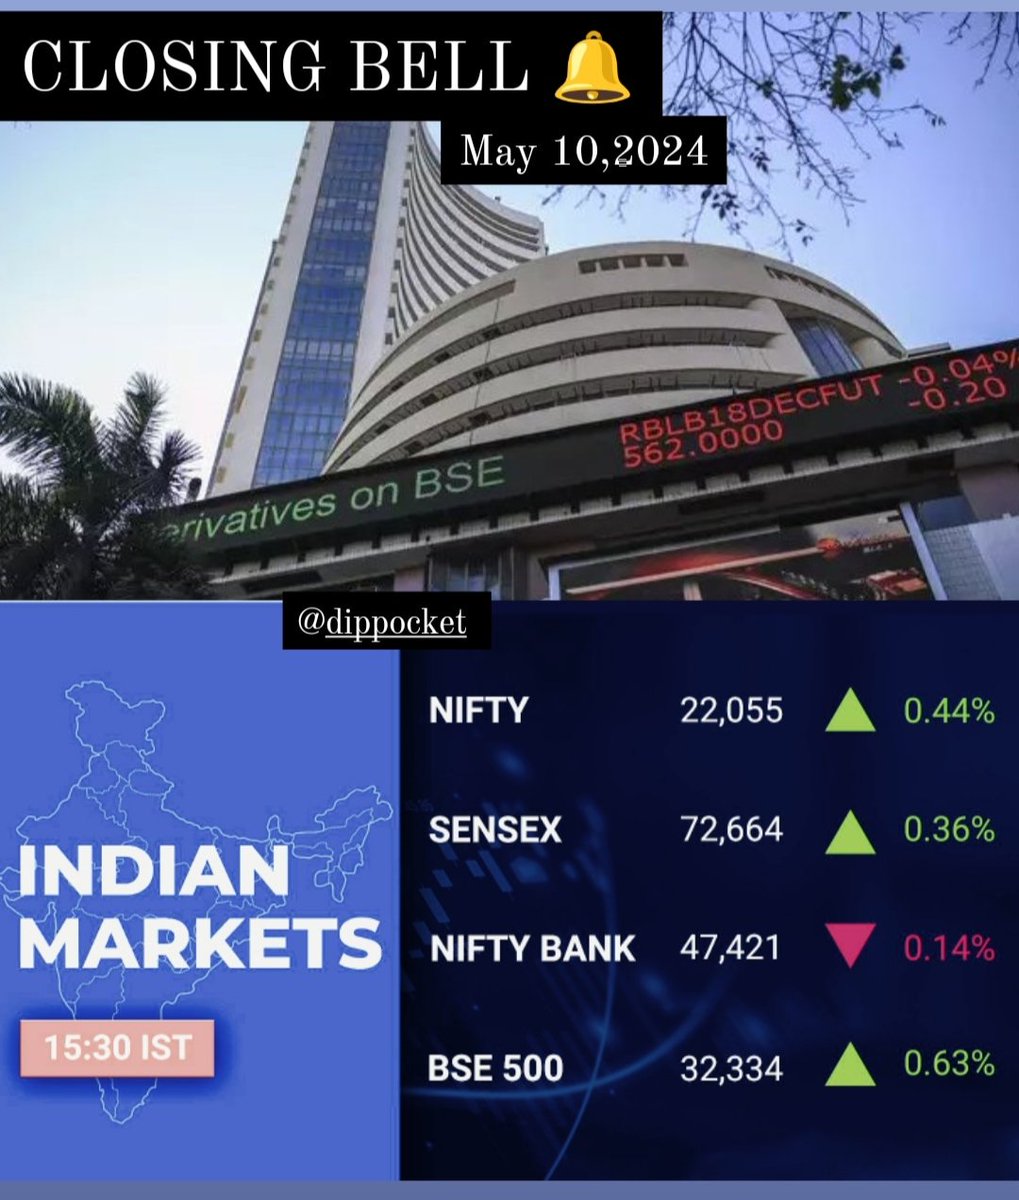 #Nifty, #Sensex log worst week in nearly two months. stockmarkets #StockMarketindia #nse #bse #sensex #nifty #niftybank #intradaytrading #banknifty #intraday #intradaytrader #Optionselling #sharemarket #bse500 #closingbell